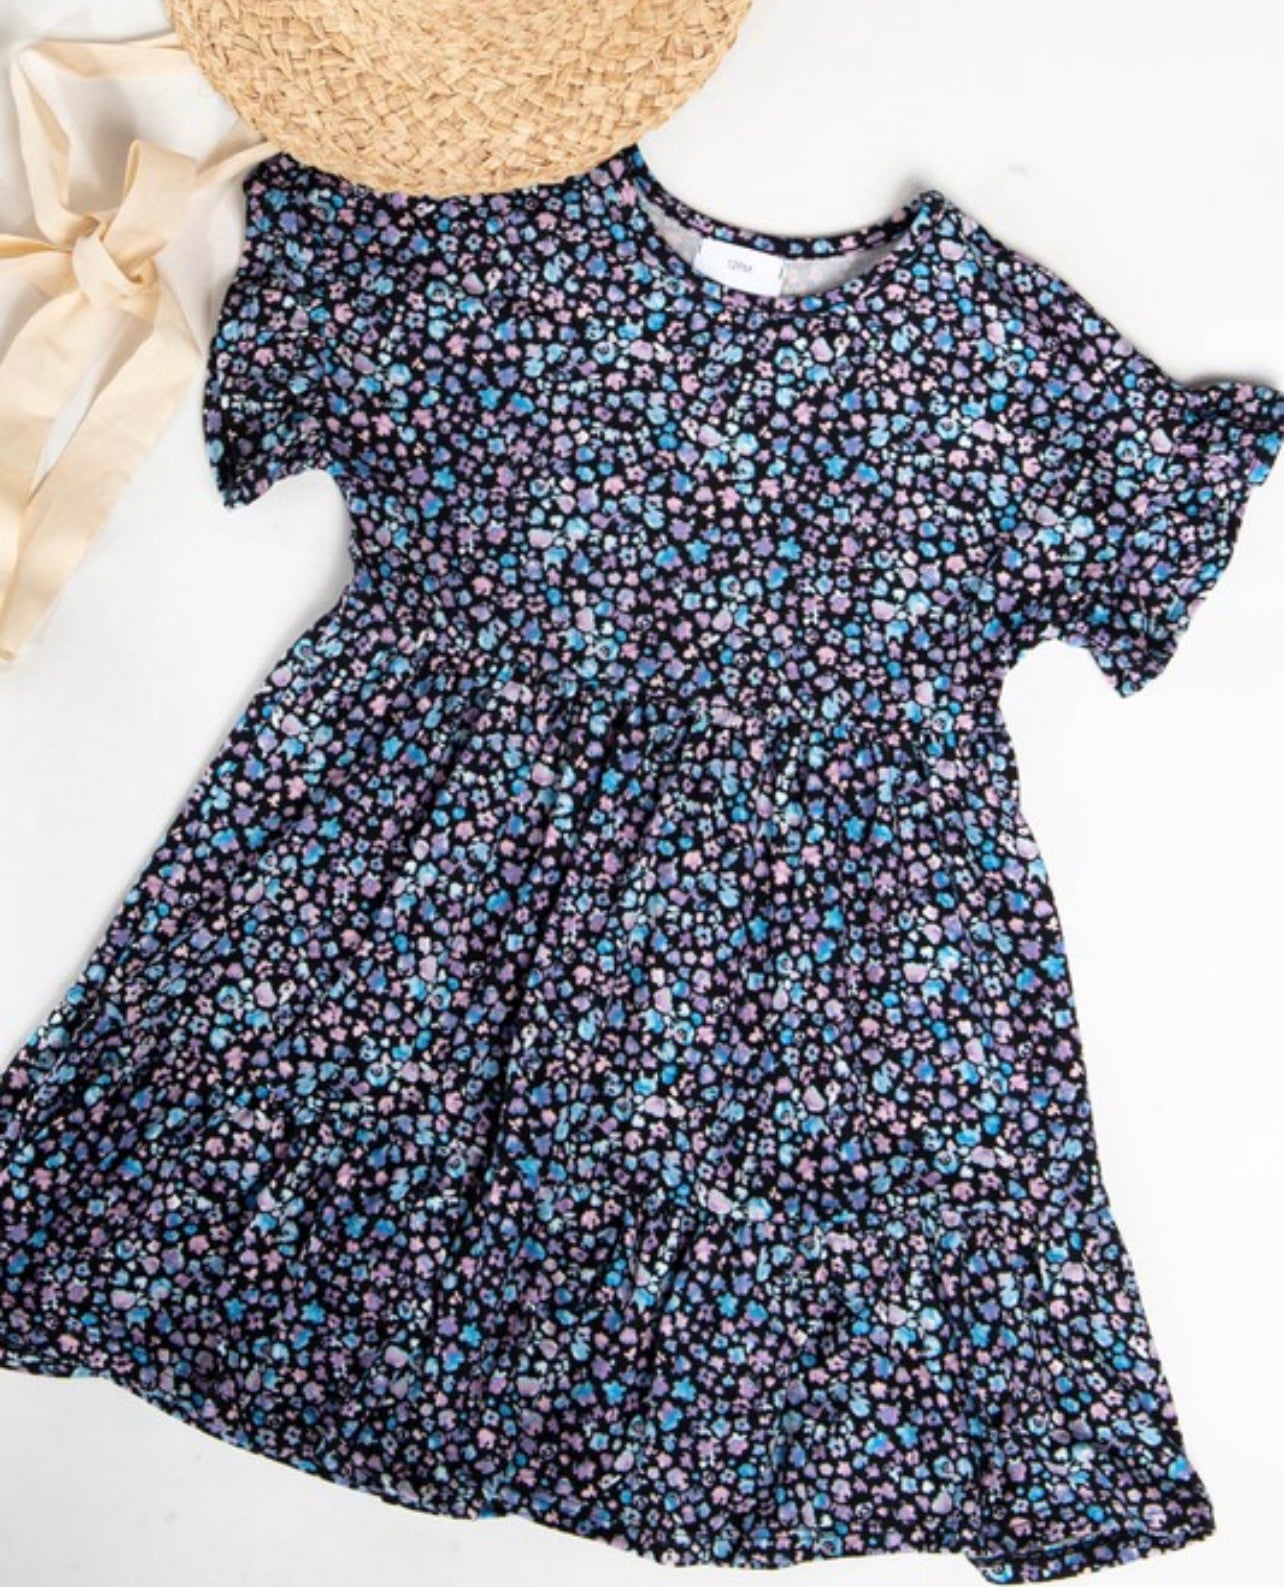 Youth Floral Dress